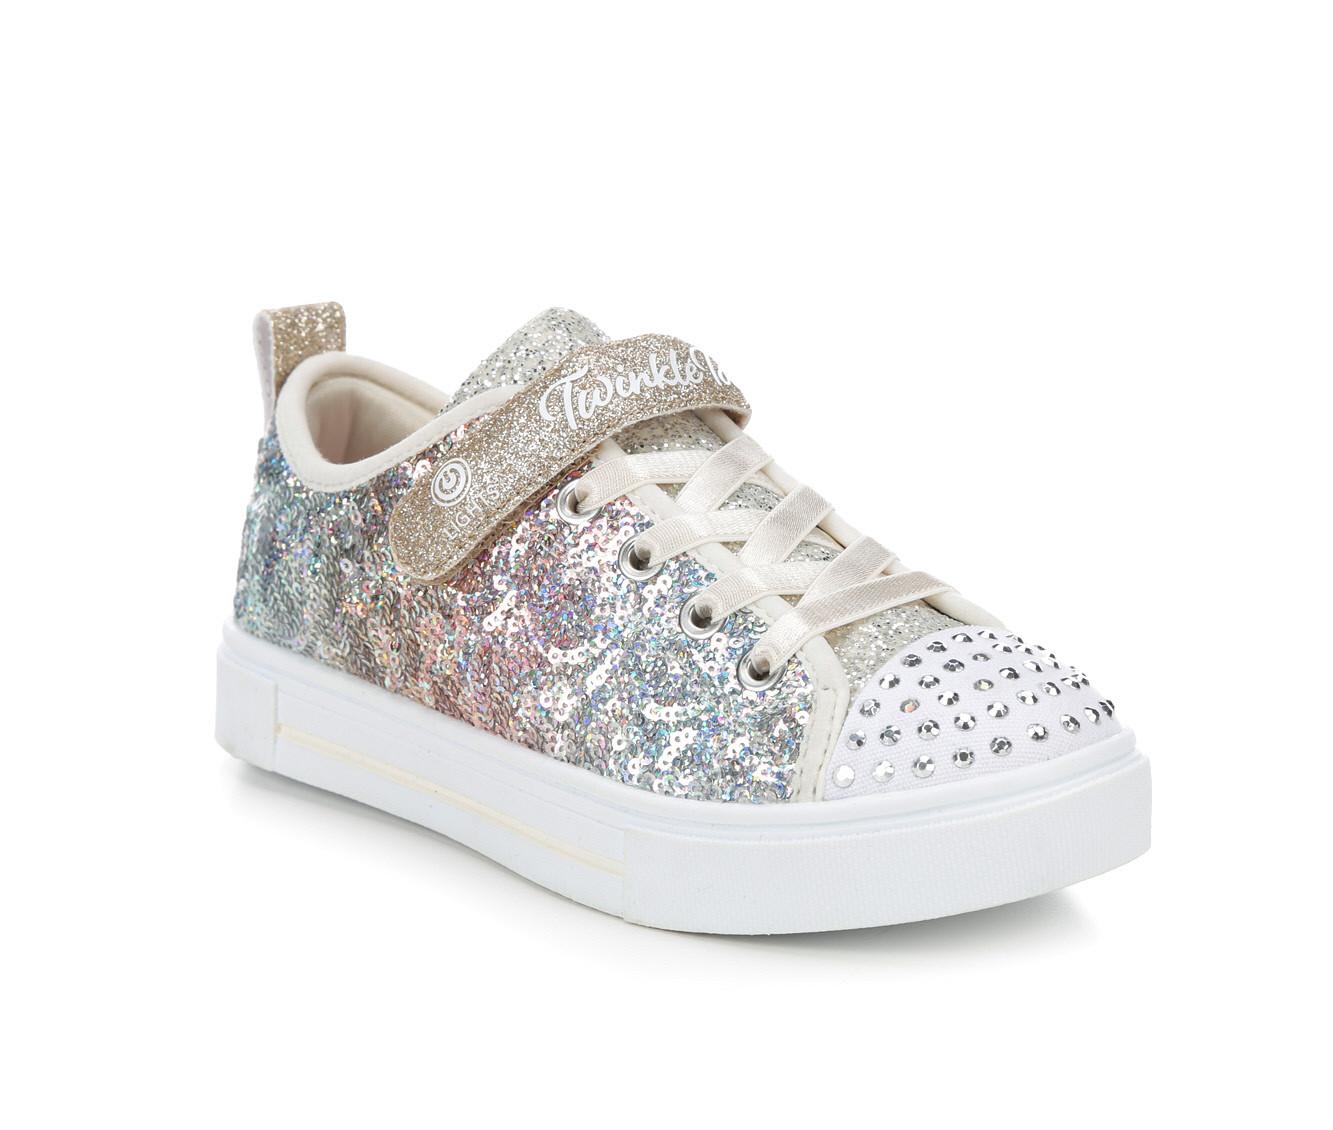 Very G Light Up My World Sparkly Sneakers in Gray 8